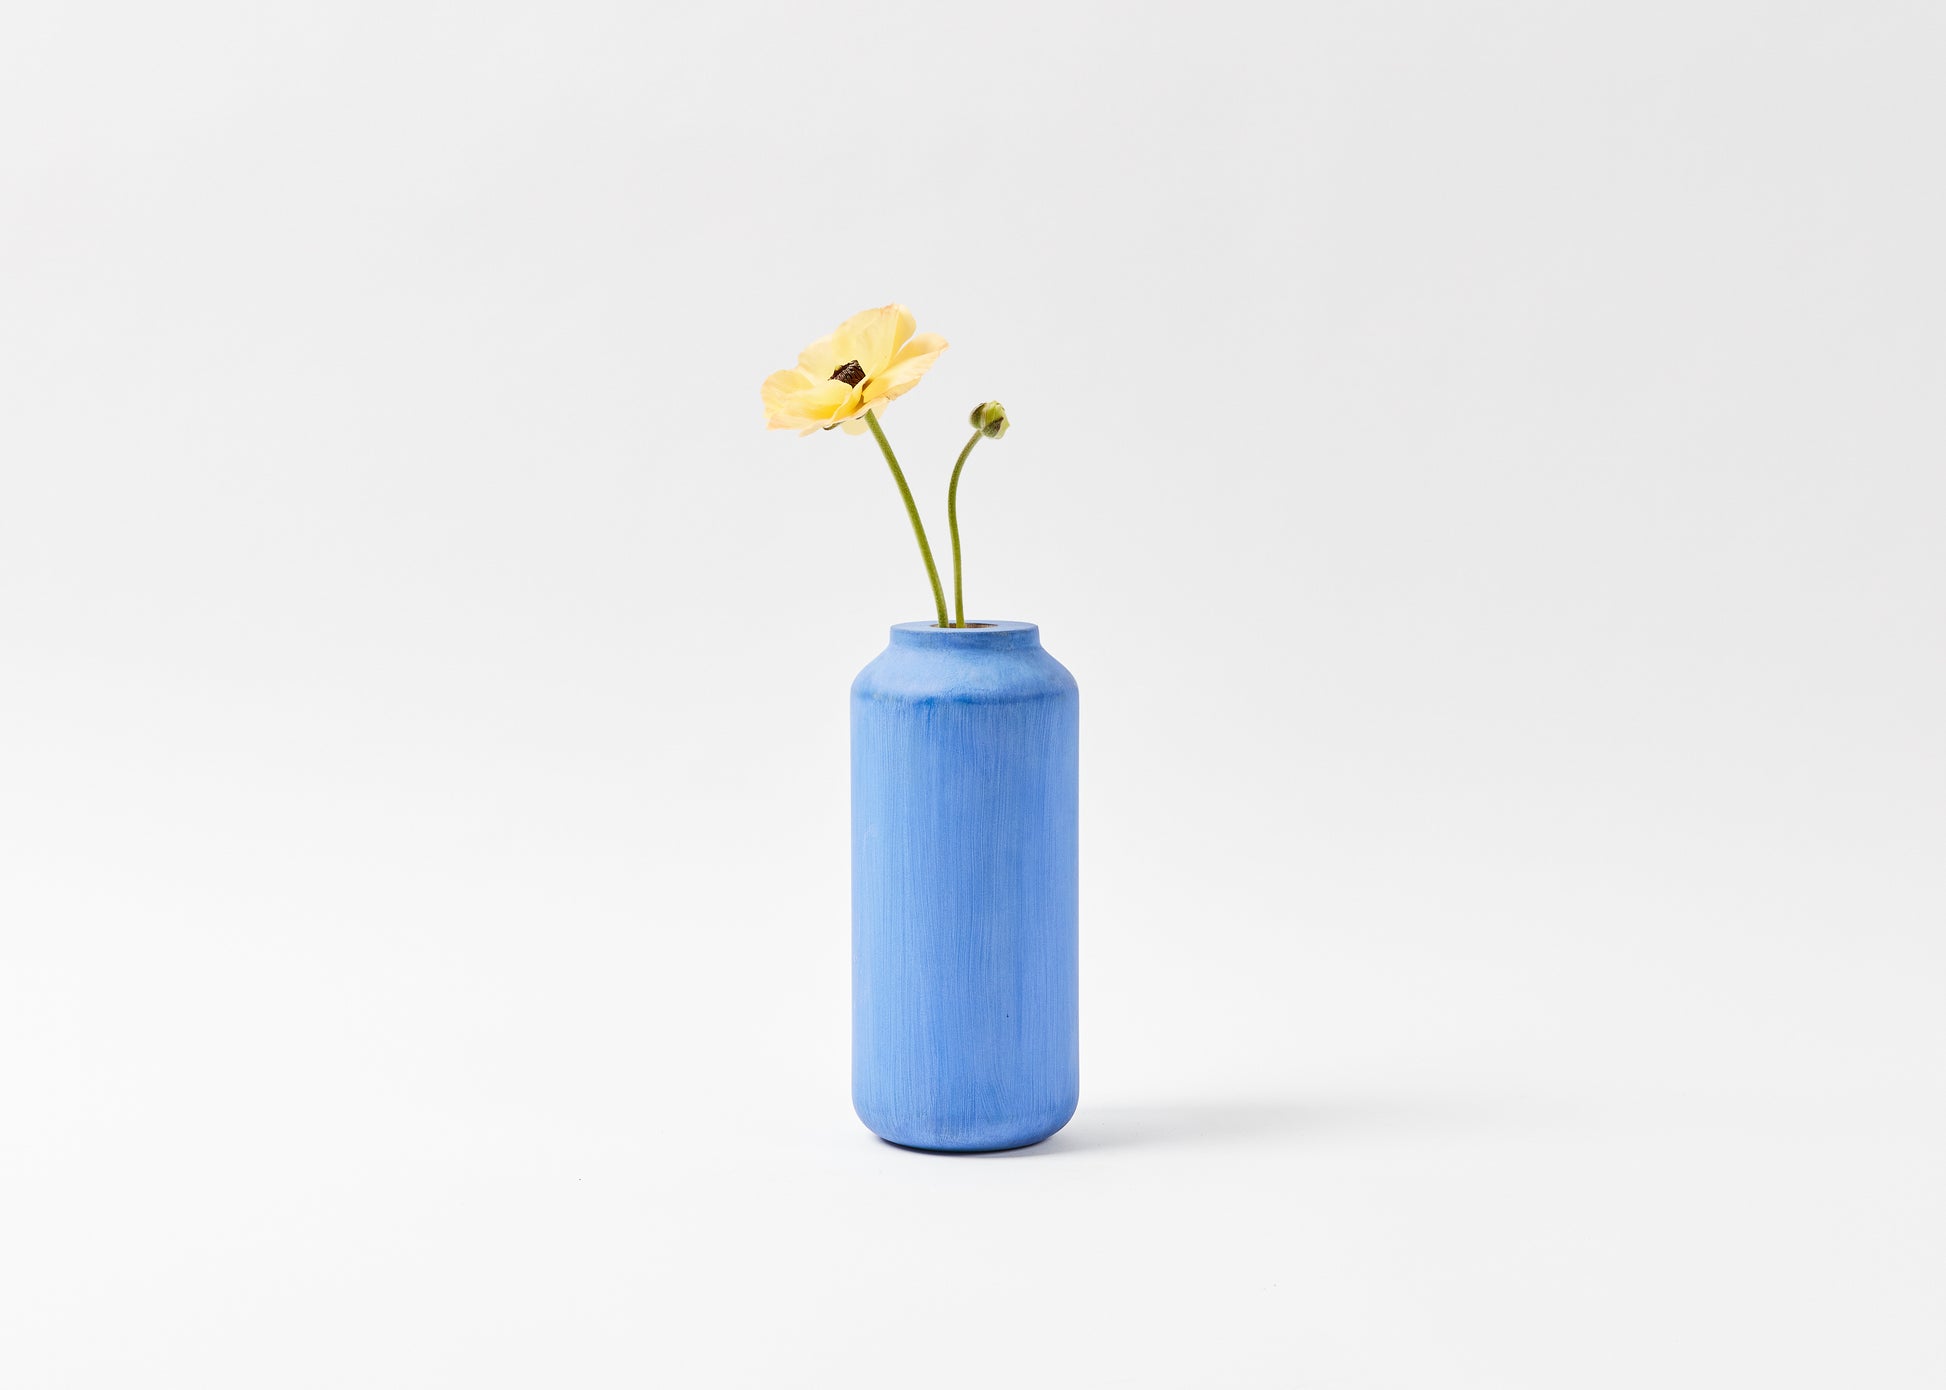 Tall & Wide Vase, hand painted cobalt blue. Yellow flower in the vase. Josef collection by Melanie Abrantes Designs